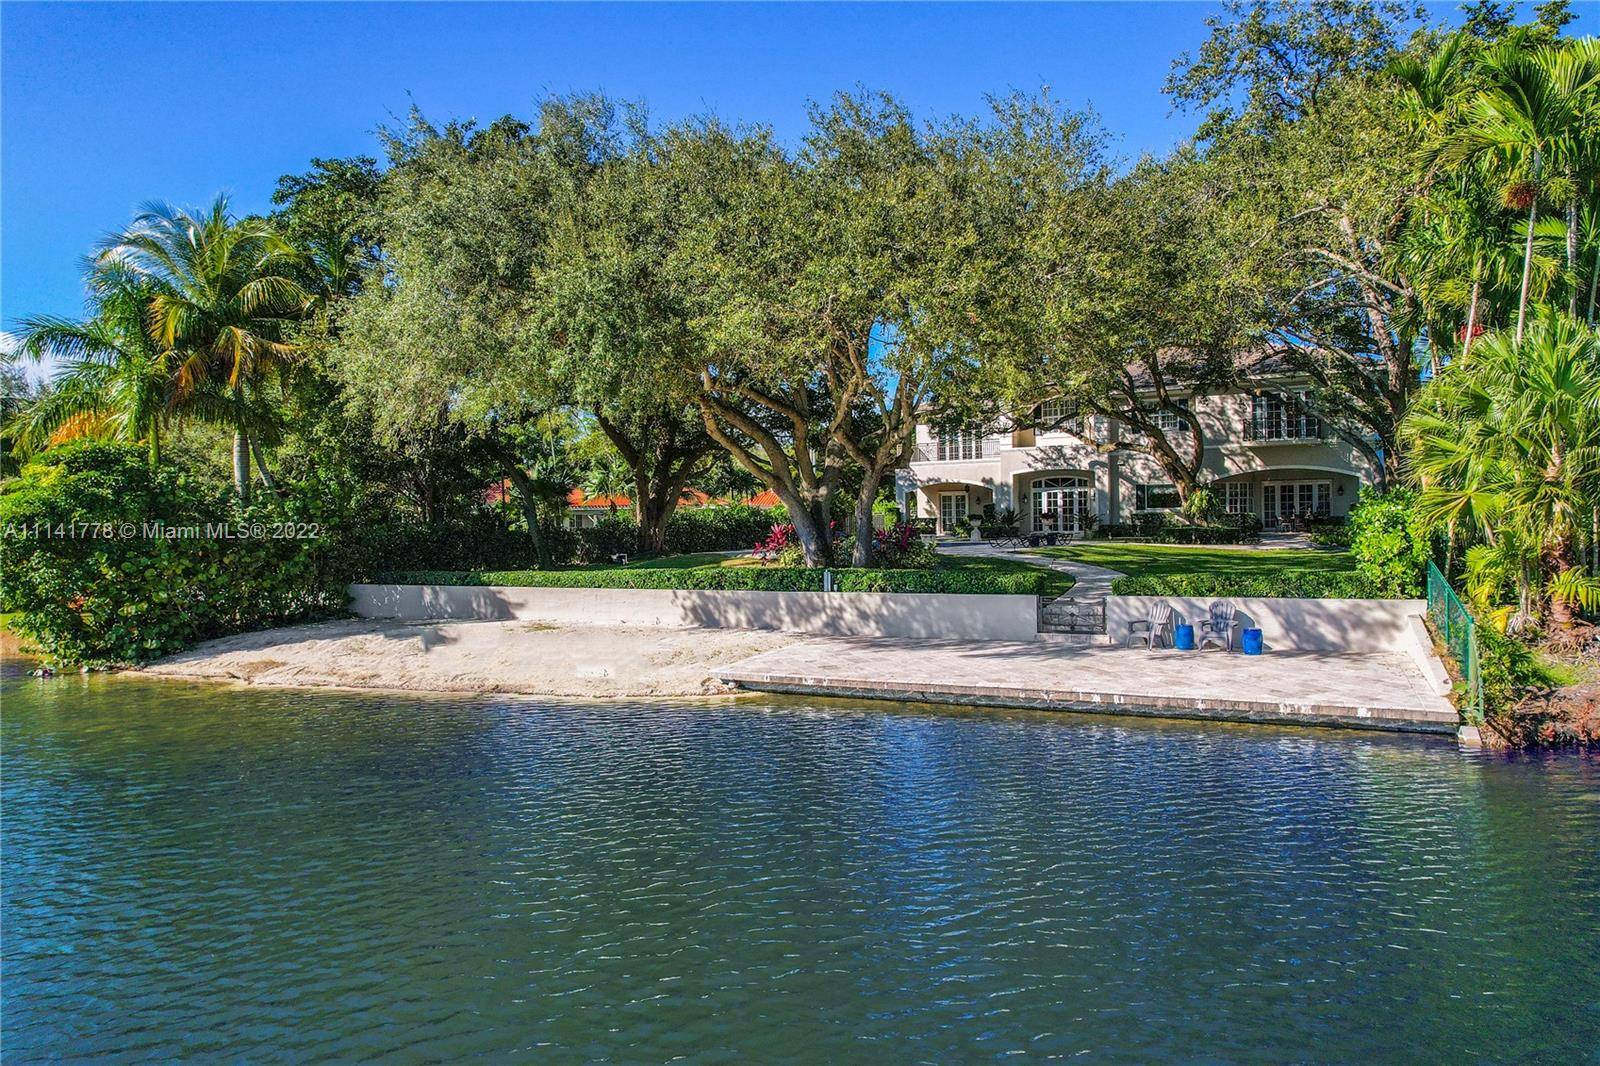 Splendid Hammock Lakes residence sits on a picture perfect lakefront acre w rolling green lawns, private white sand beach spectacular waterfront views.